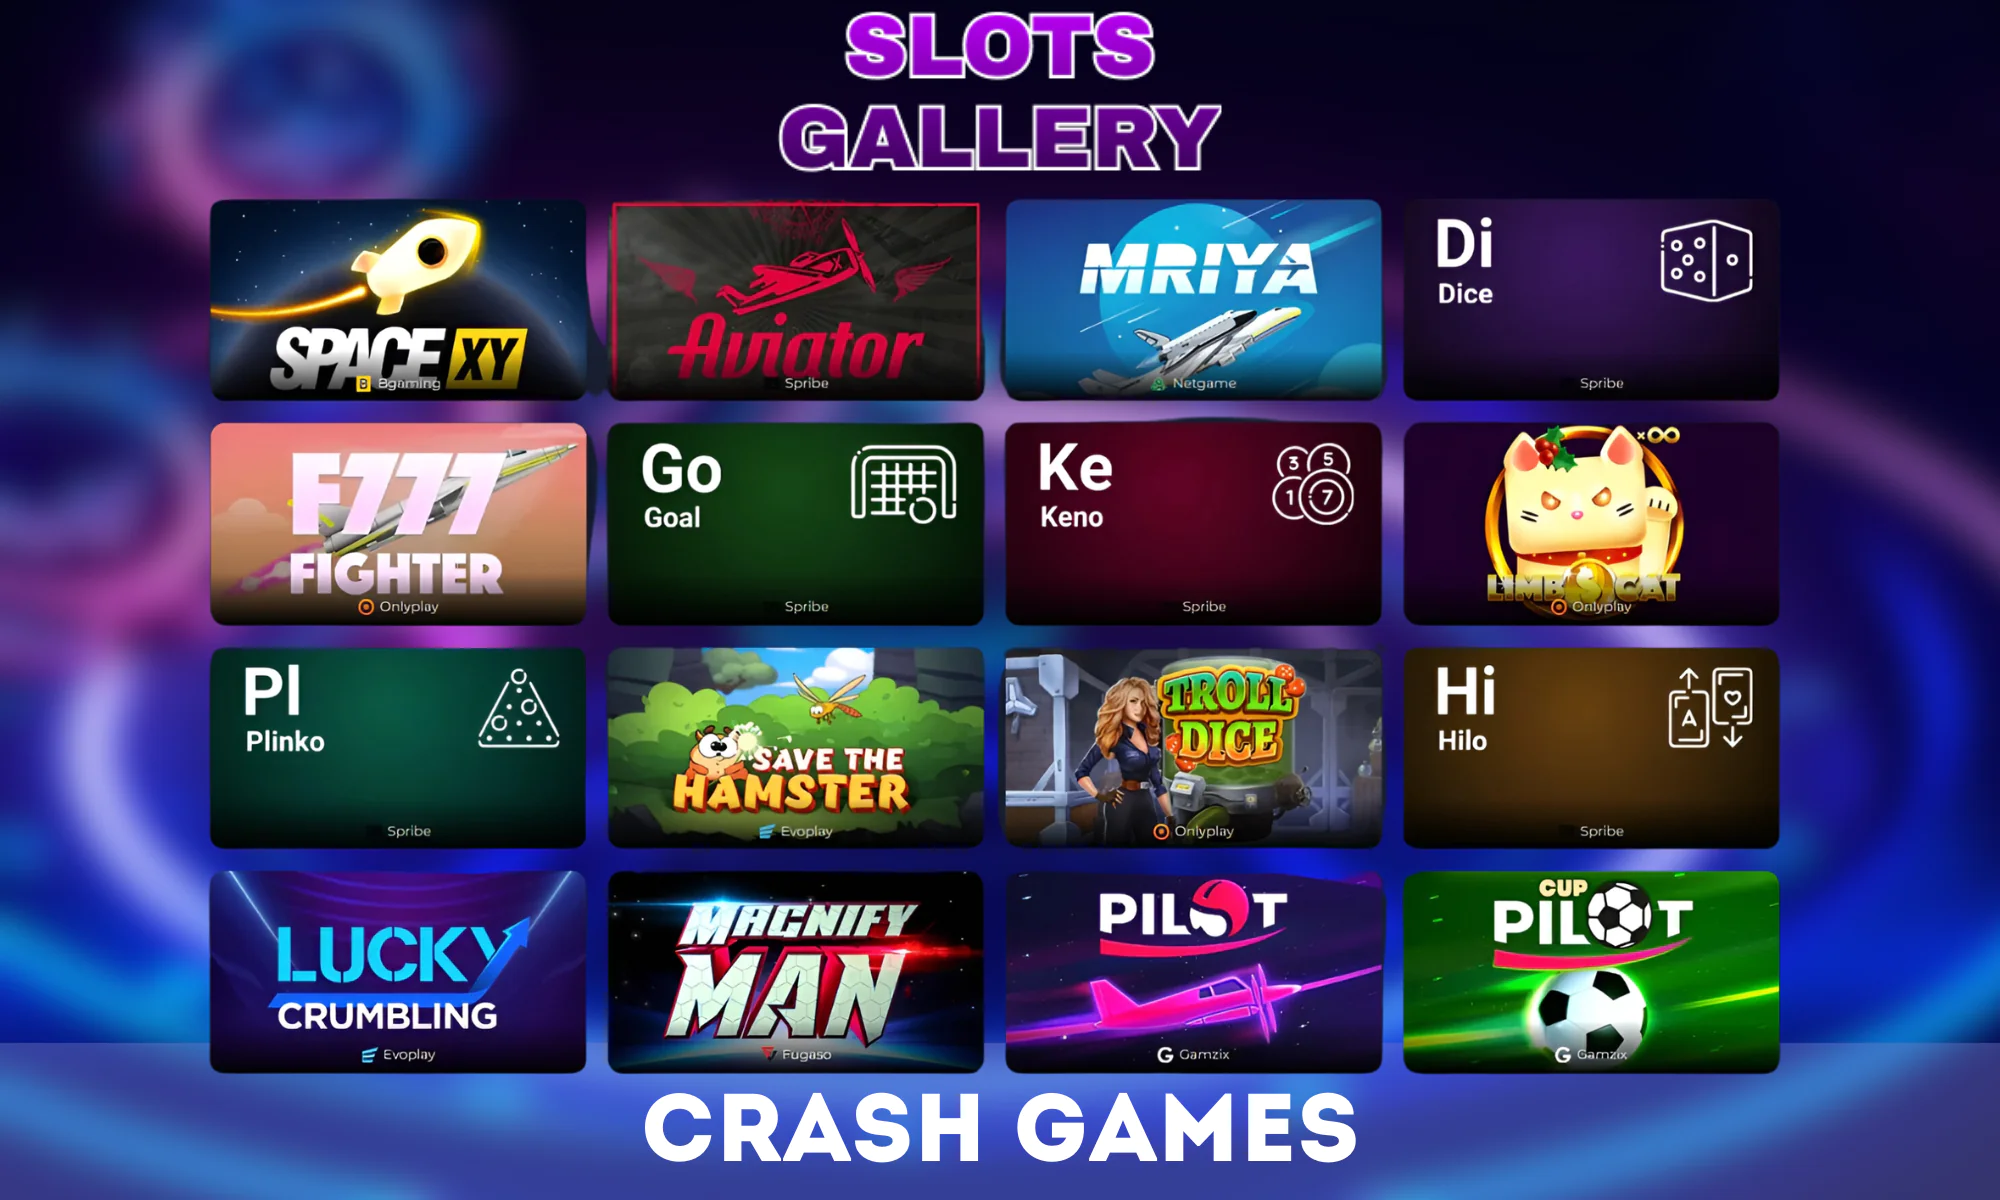 Crash games are a highlight in Slots Gallery Casino